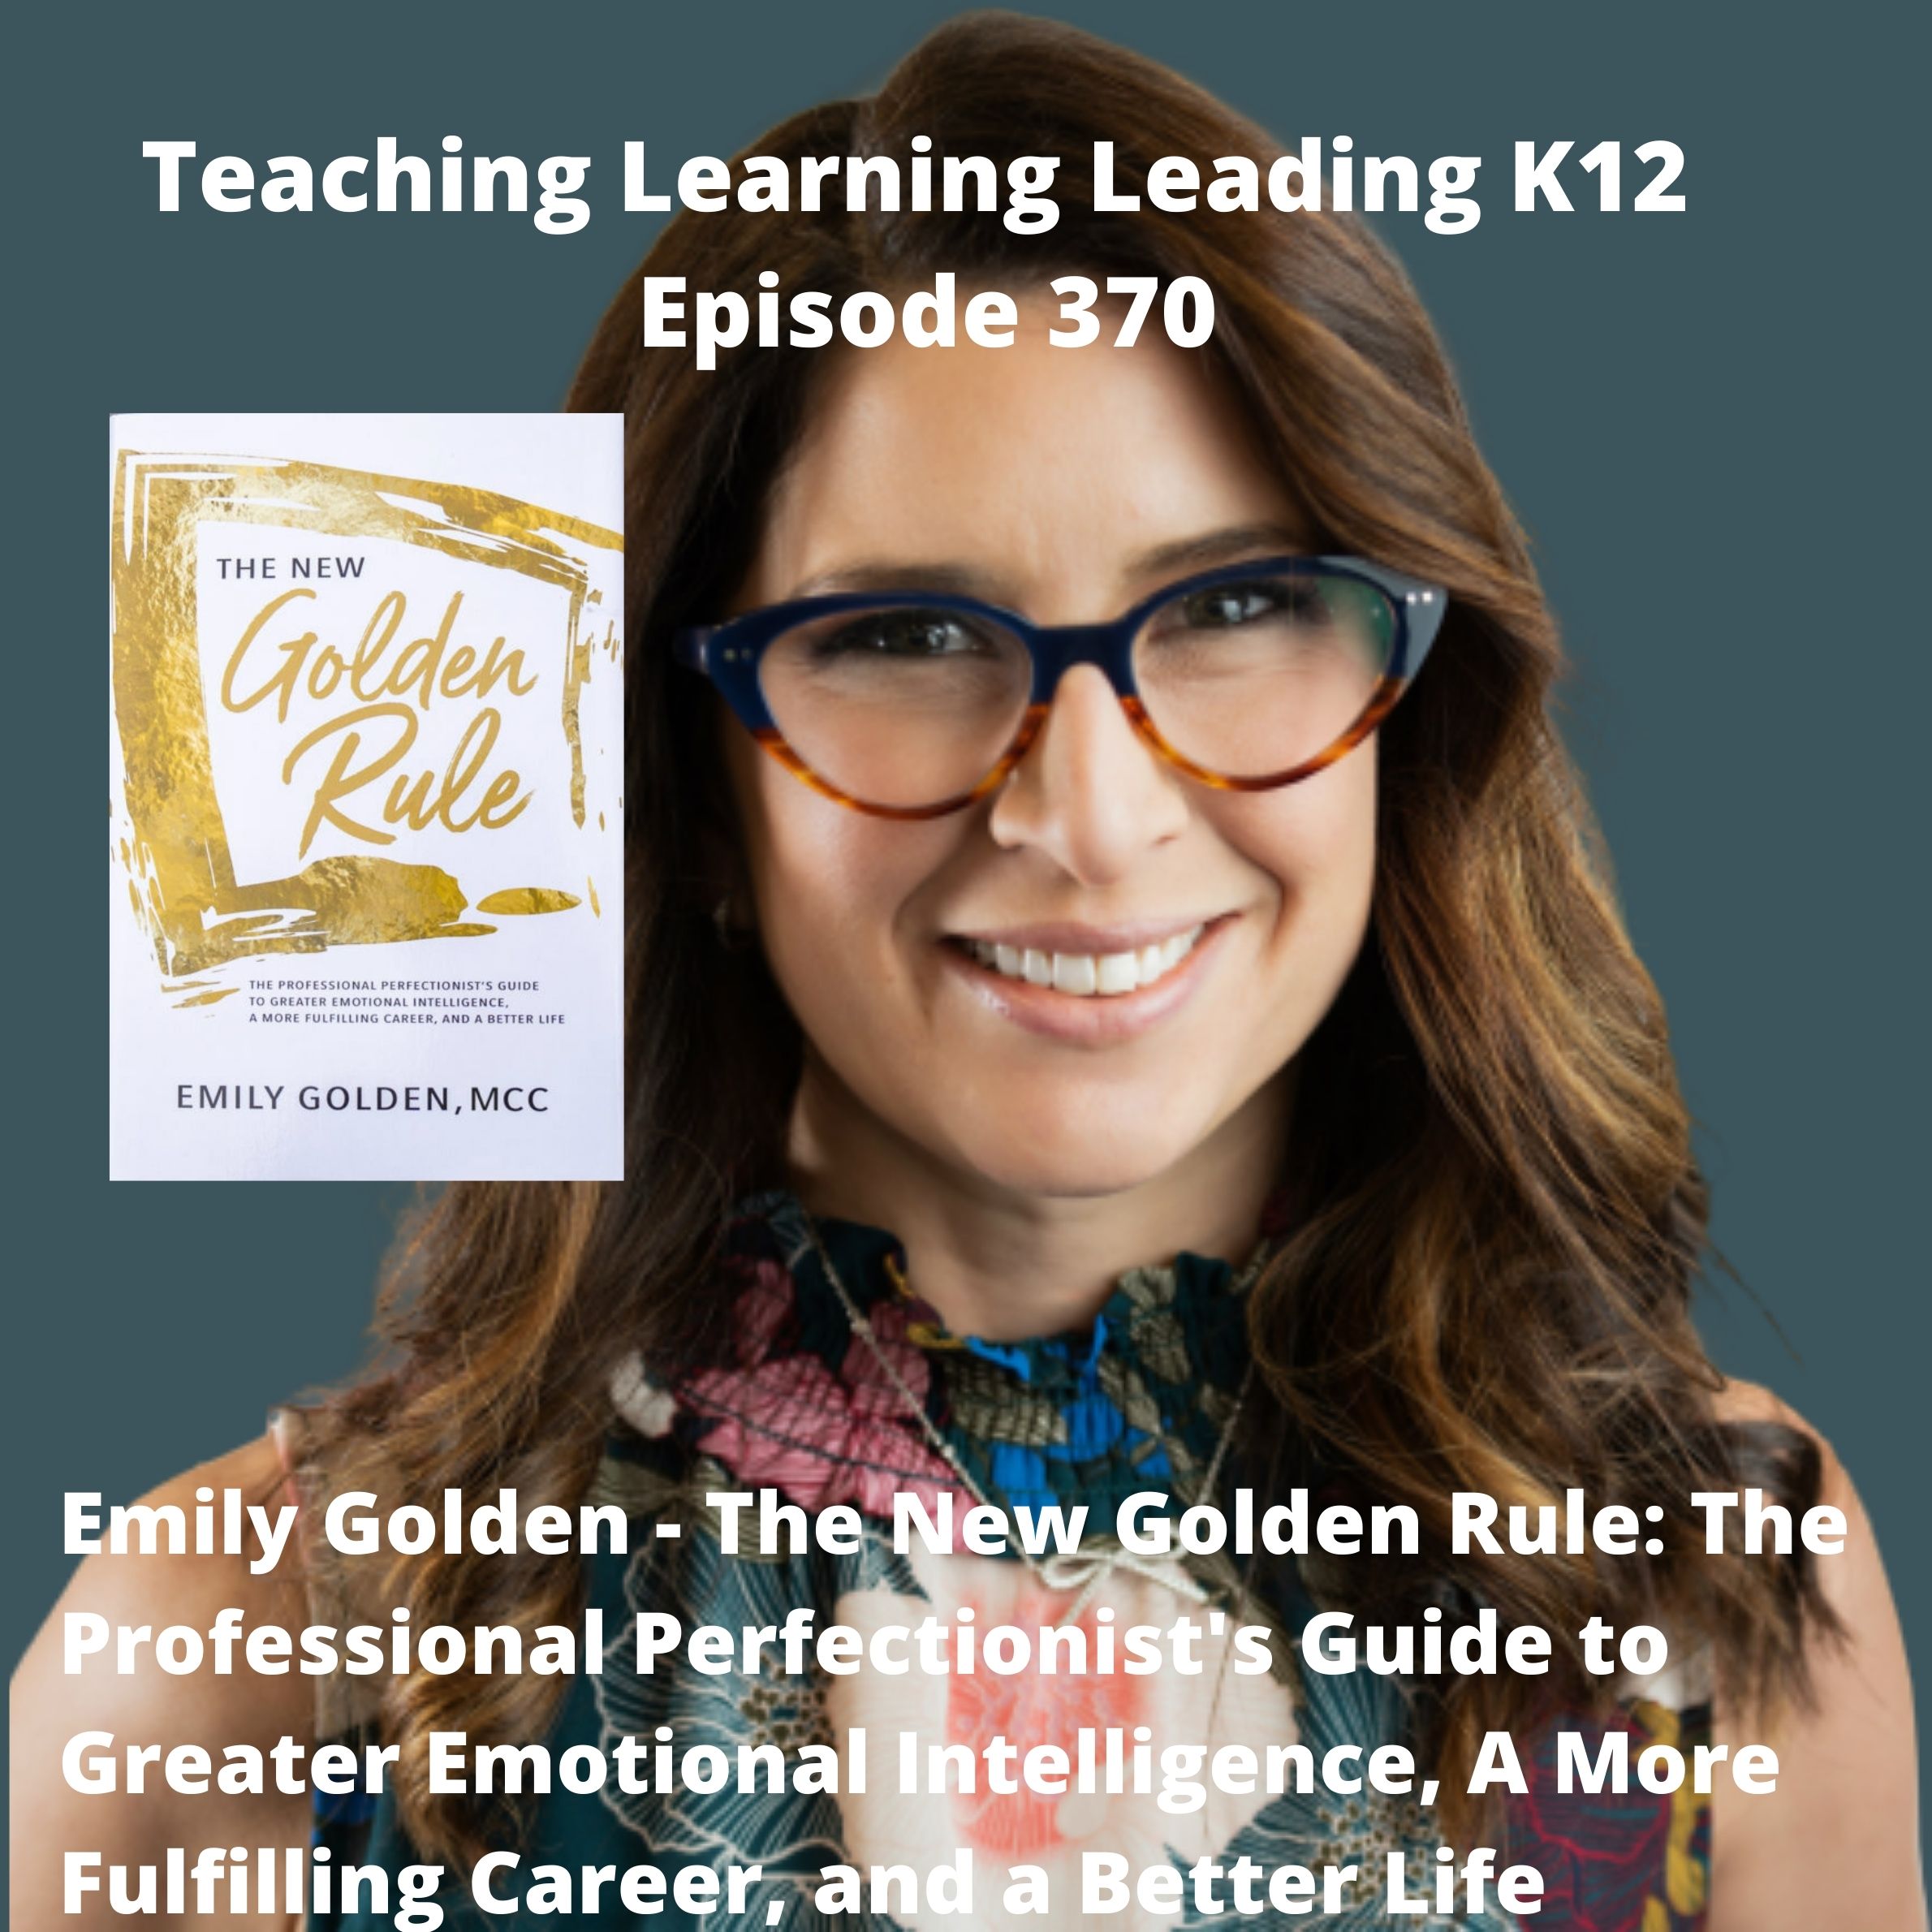 Emily Golden - The New Golden Rule: The Professional Perfectionist's Guide to Greater Emotional Intelligence, A More Fulfilling Career, and A Better Life - 370 Image